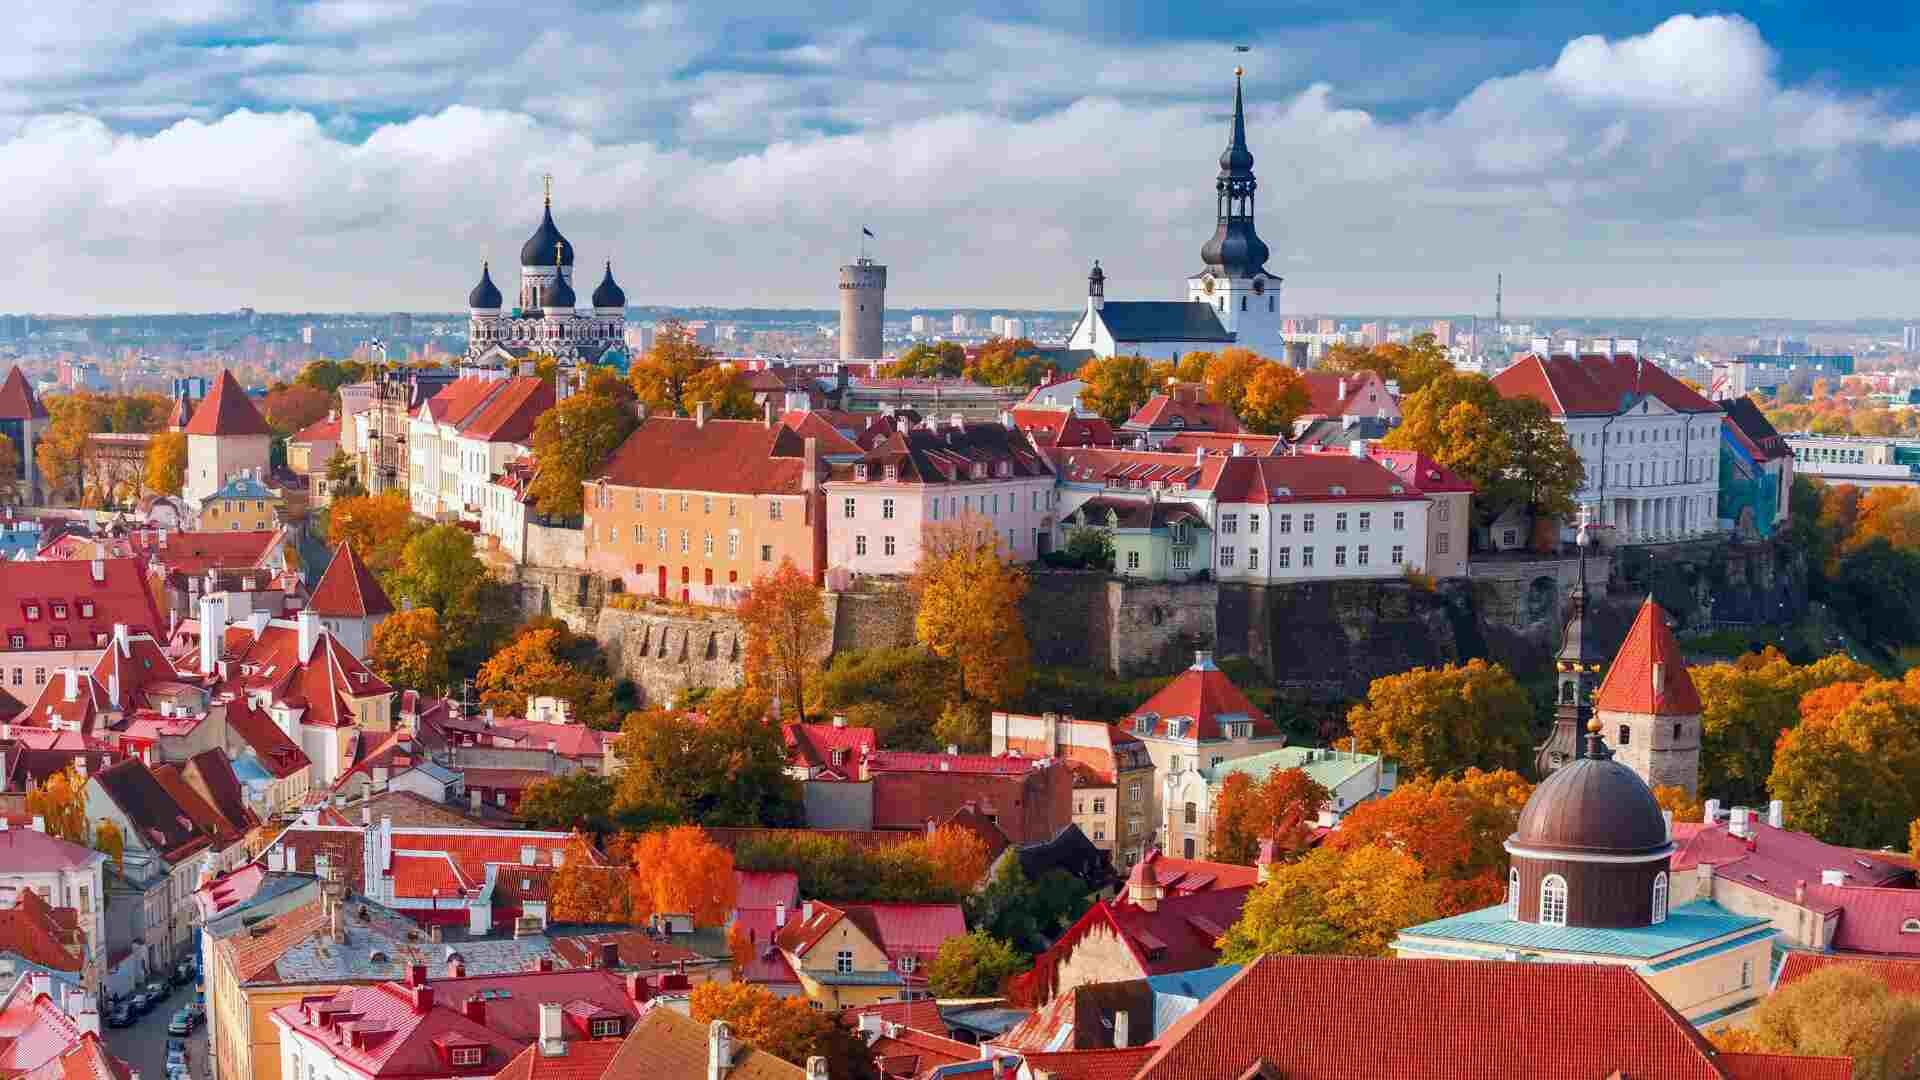 View of terracotta rooftops in Tallinn city centre